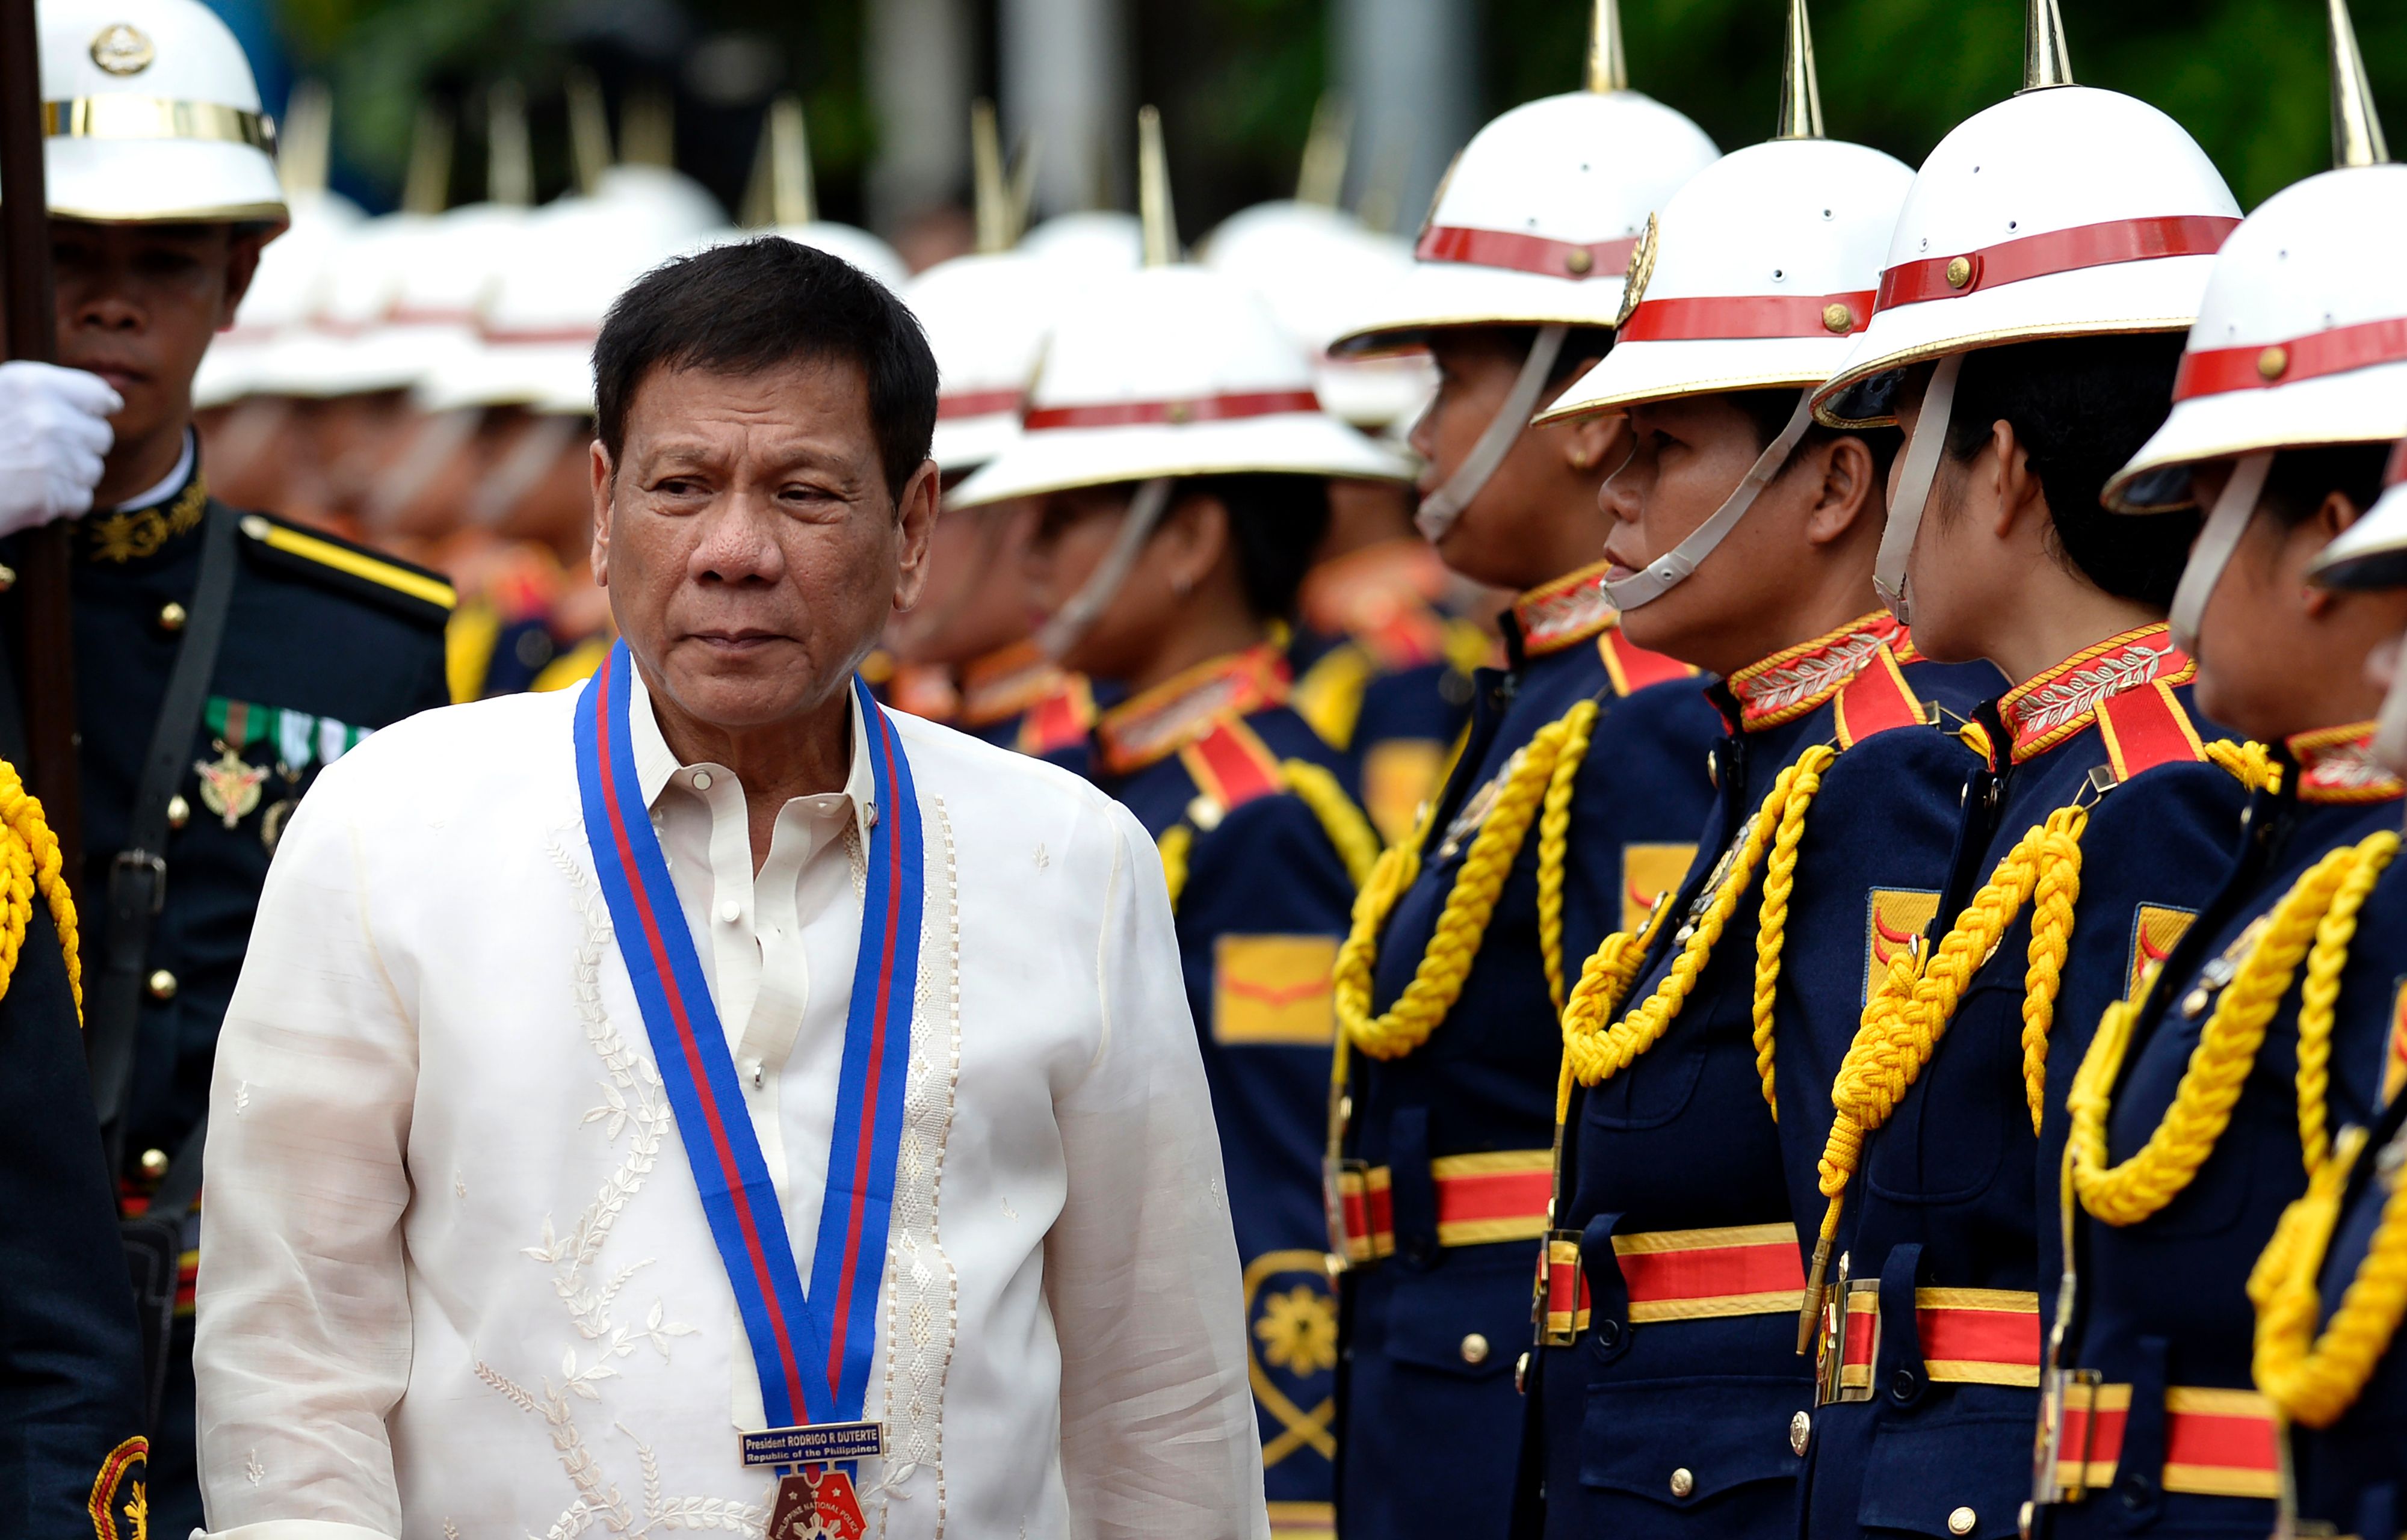 Philippine President Rodrigo Duterte walks past honour guards before Philippine National Police (PNP) chief Ronald Bato Dela Rosa's Assumption of Command Ceremony at the Camp Crame in Manila on July 1, 2016.  Authoritarian firebrand Rodrigo Duterte was sworn in as the Philippines' president on June 30, after promising a ruthless and deeply controversial war on crime would be the main focus of his six-year term. / AFP / NOEL CELIS        (Photo credit should read NOEL CELIS/AFP/Getty Images)